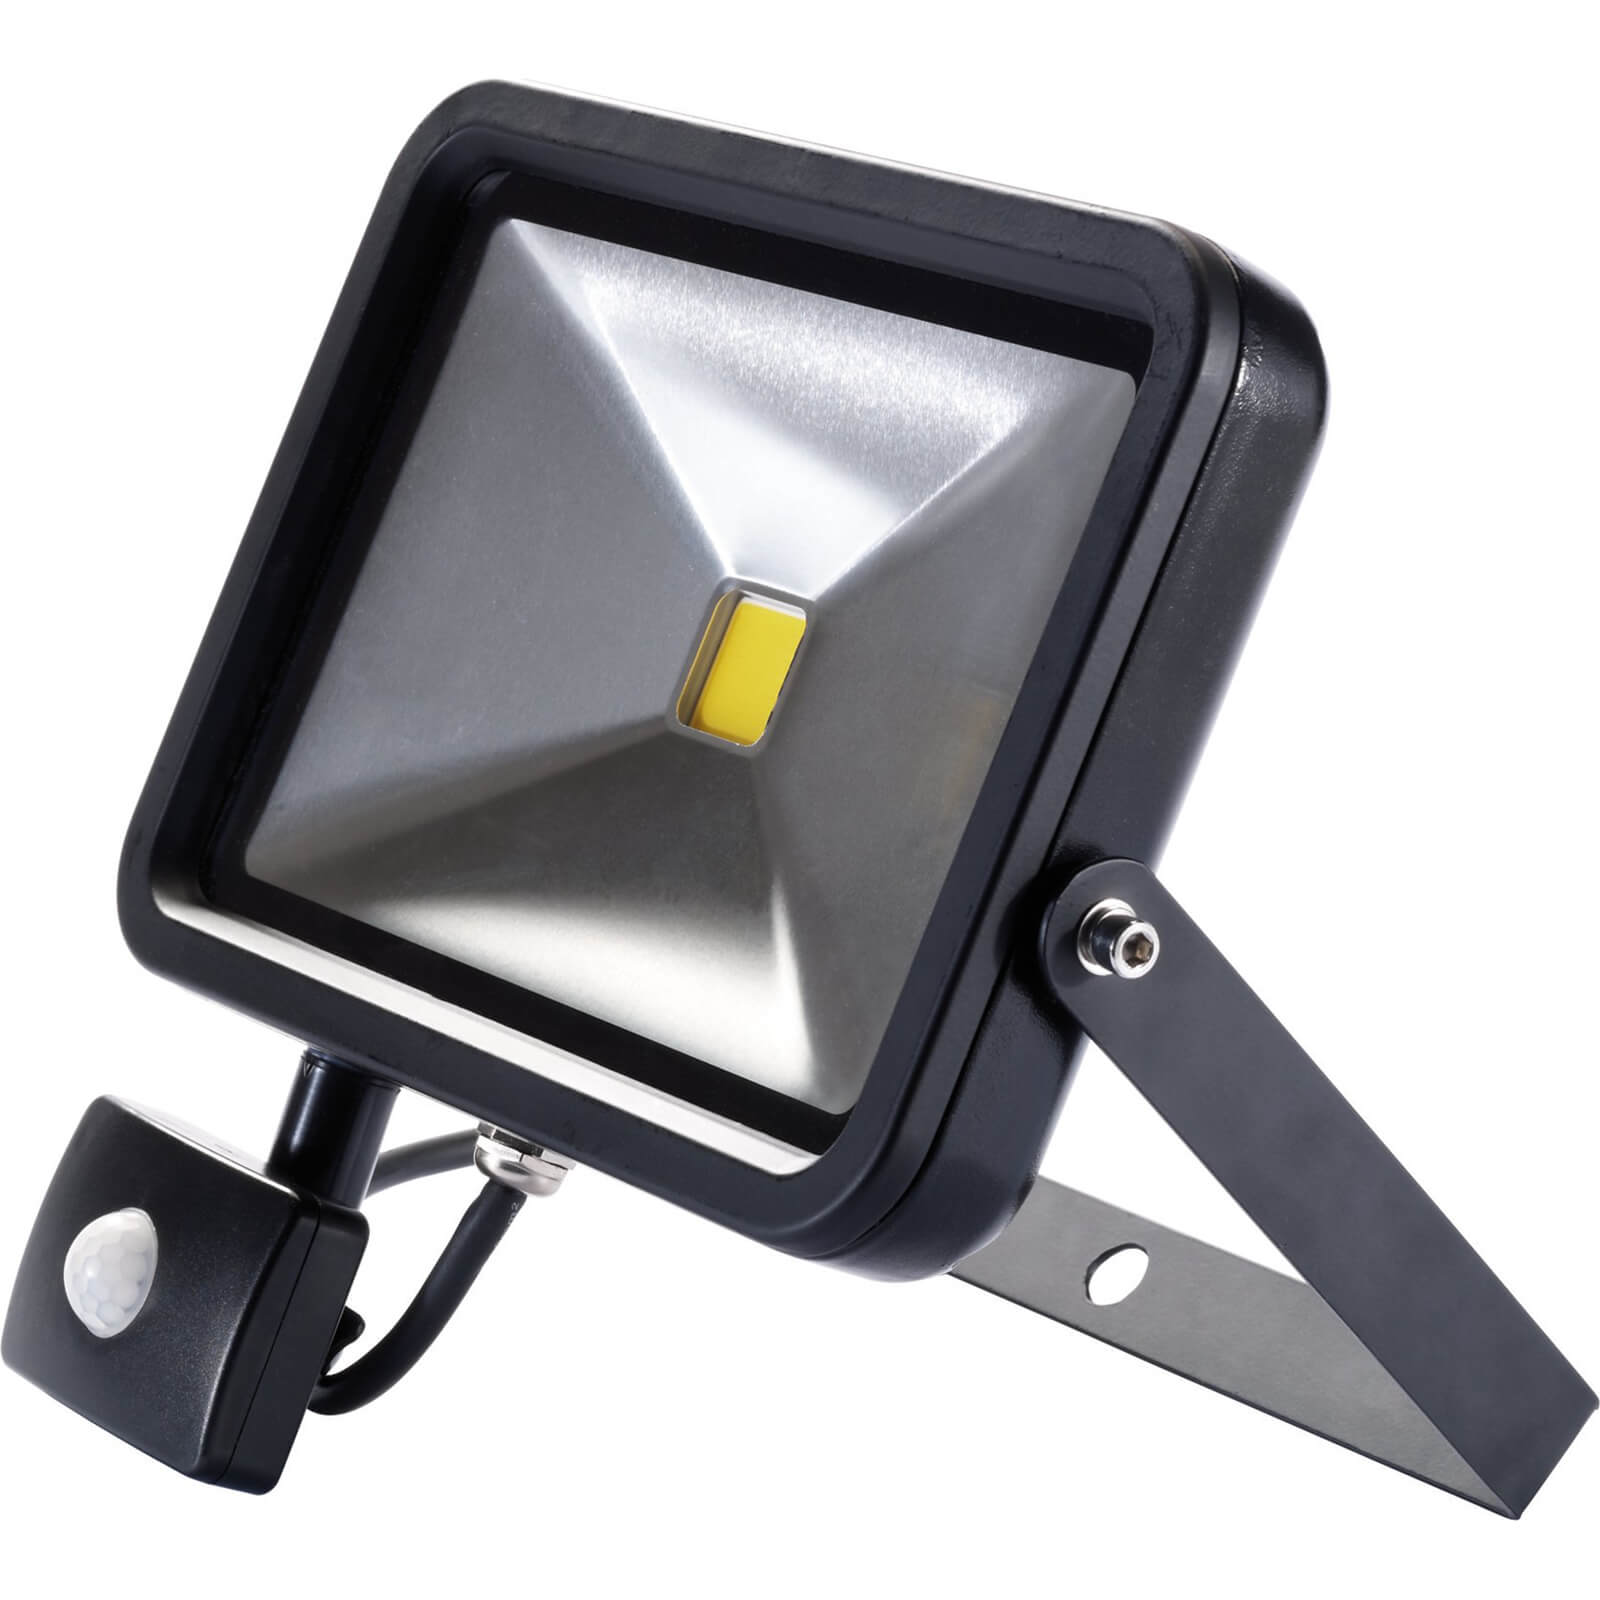 Photo of Draper Cob Led Slimeline Wall Mounted Floodlight With Pir 30 Watts